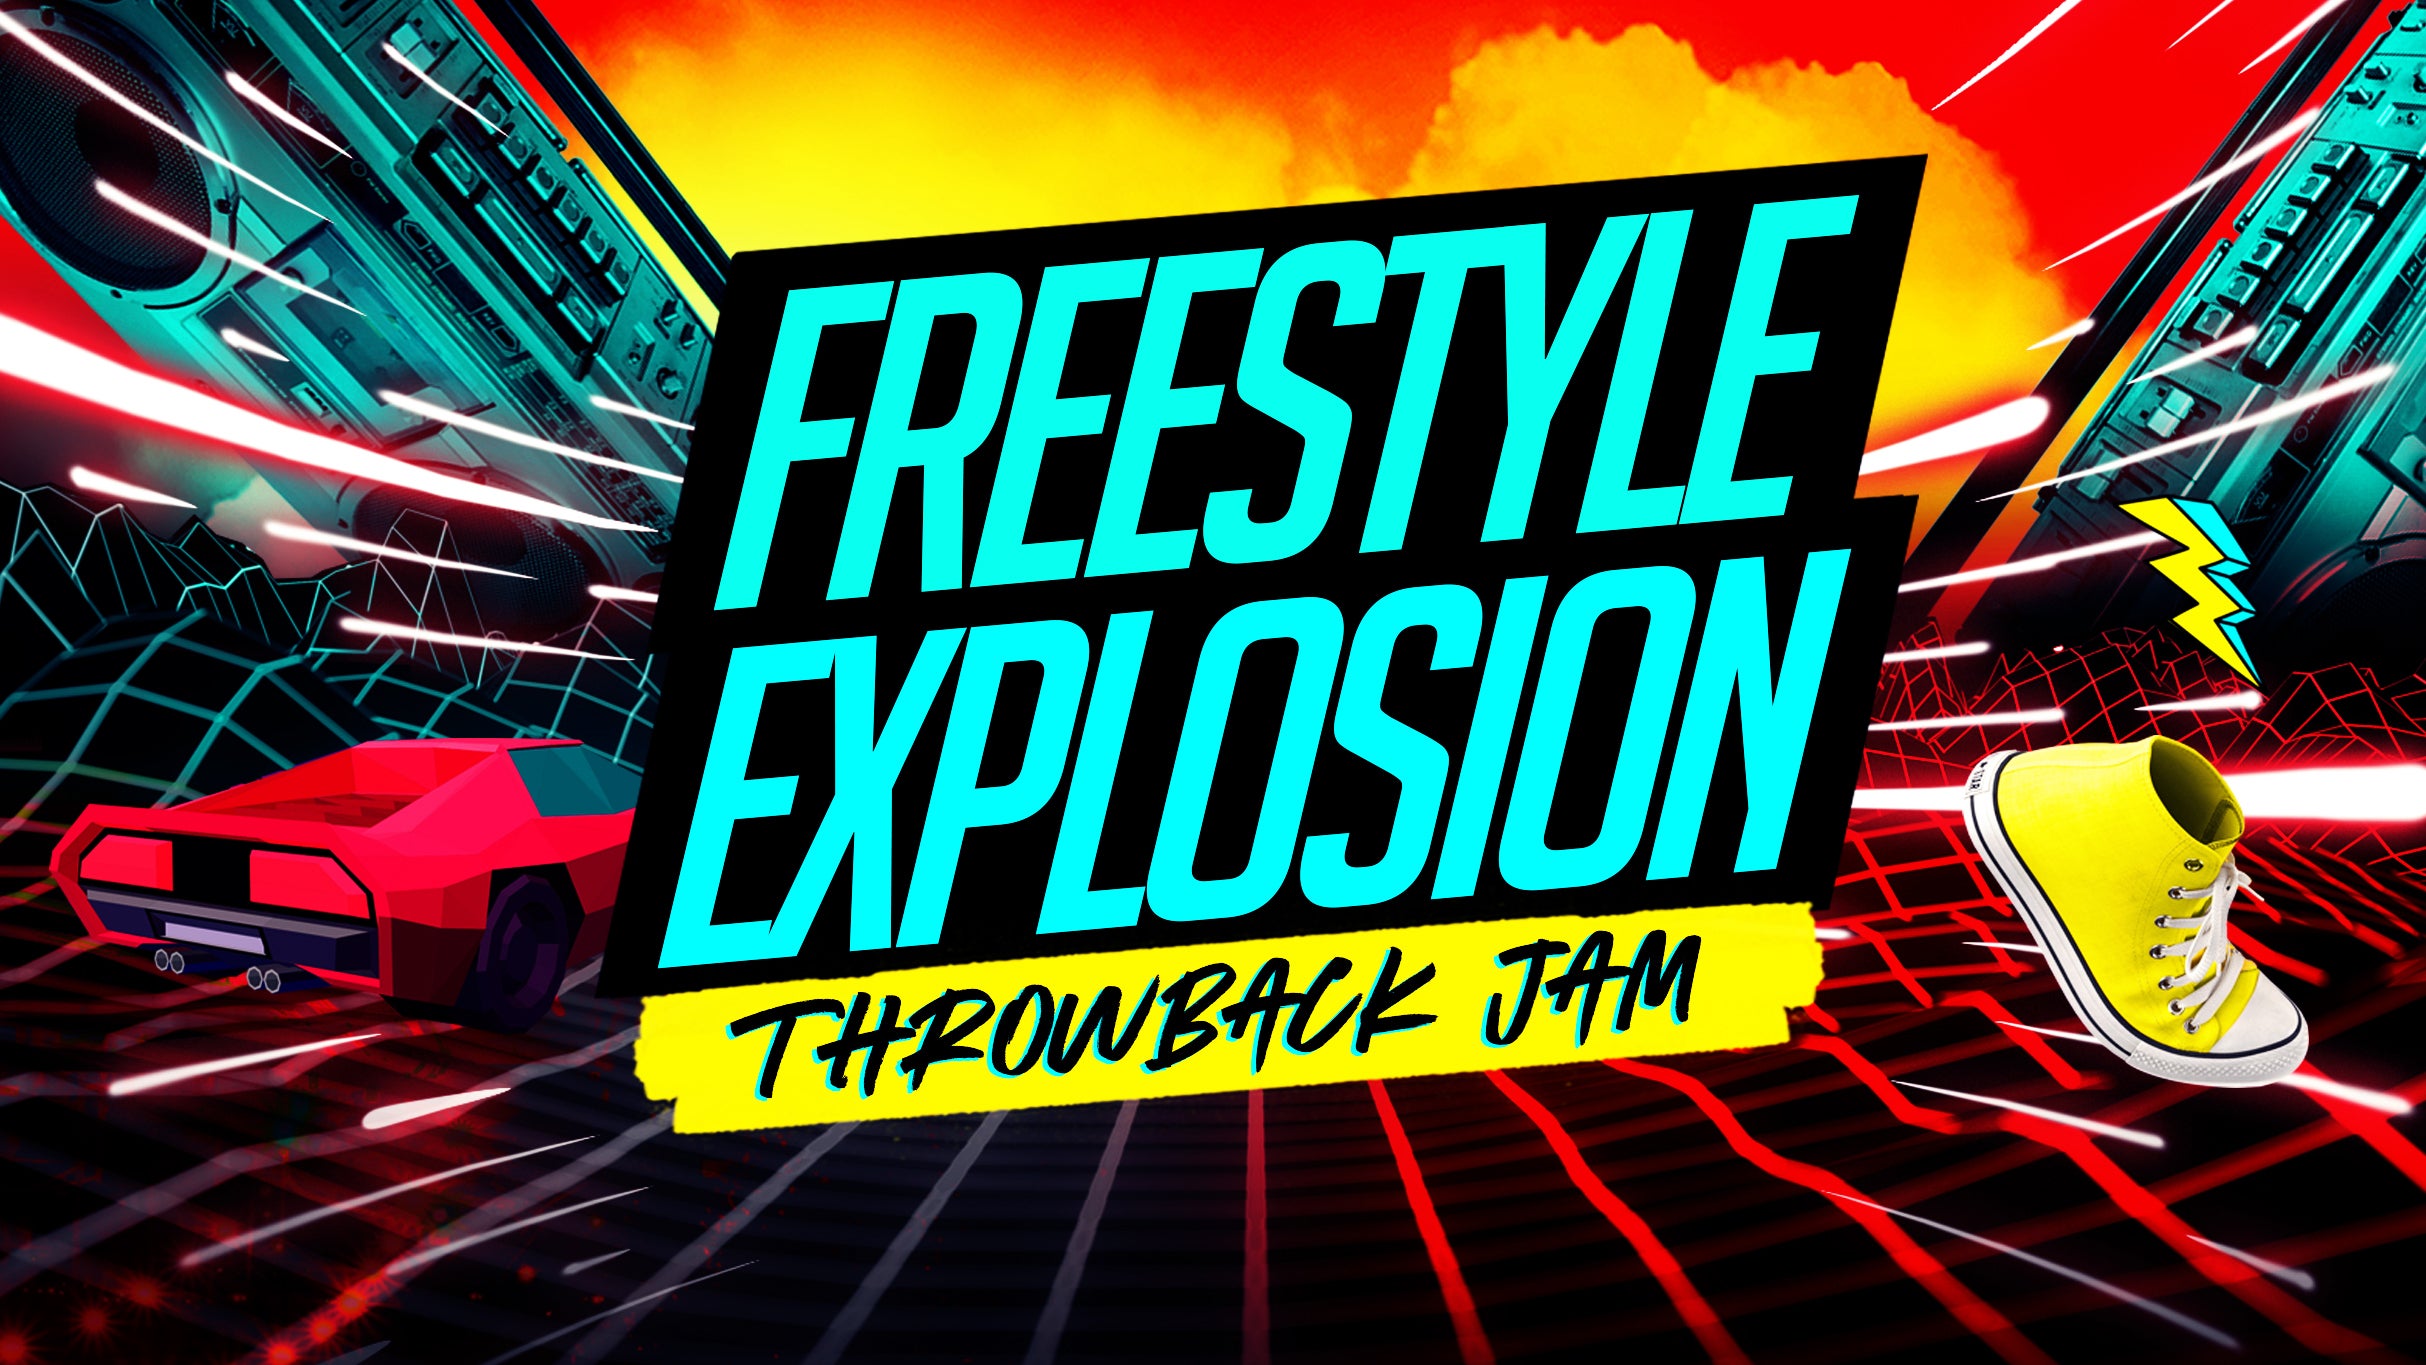 Freestyle Explosion Throwback Jam in Tampa promo photo for Venue presale offer code